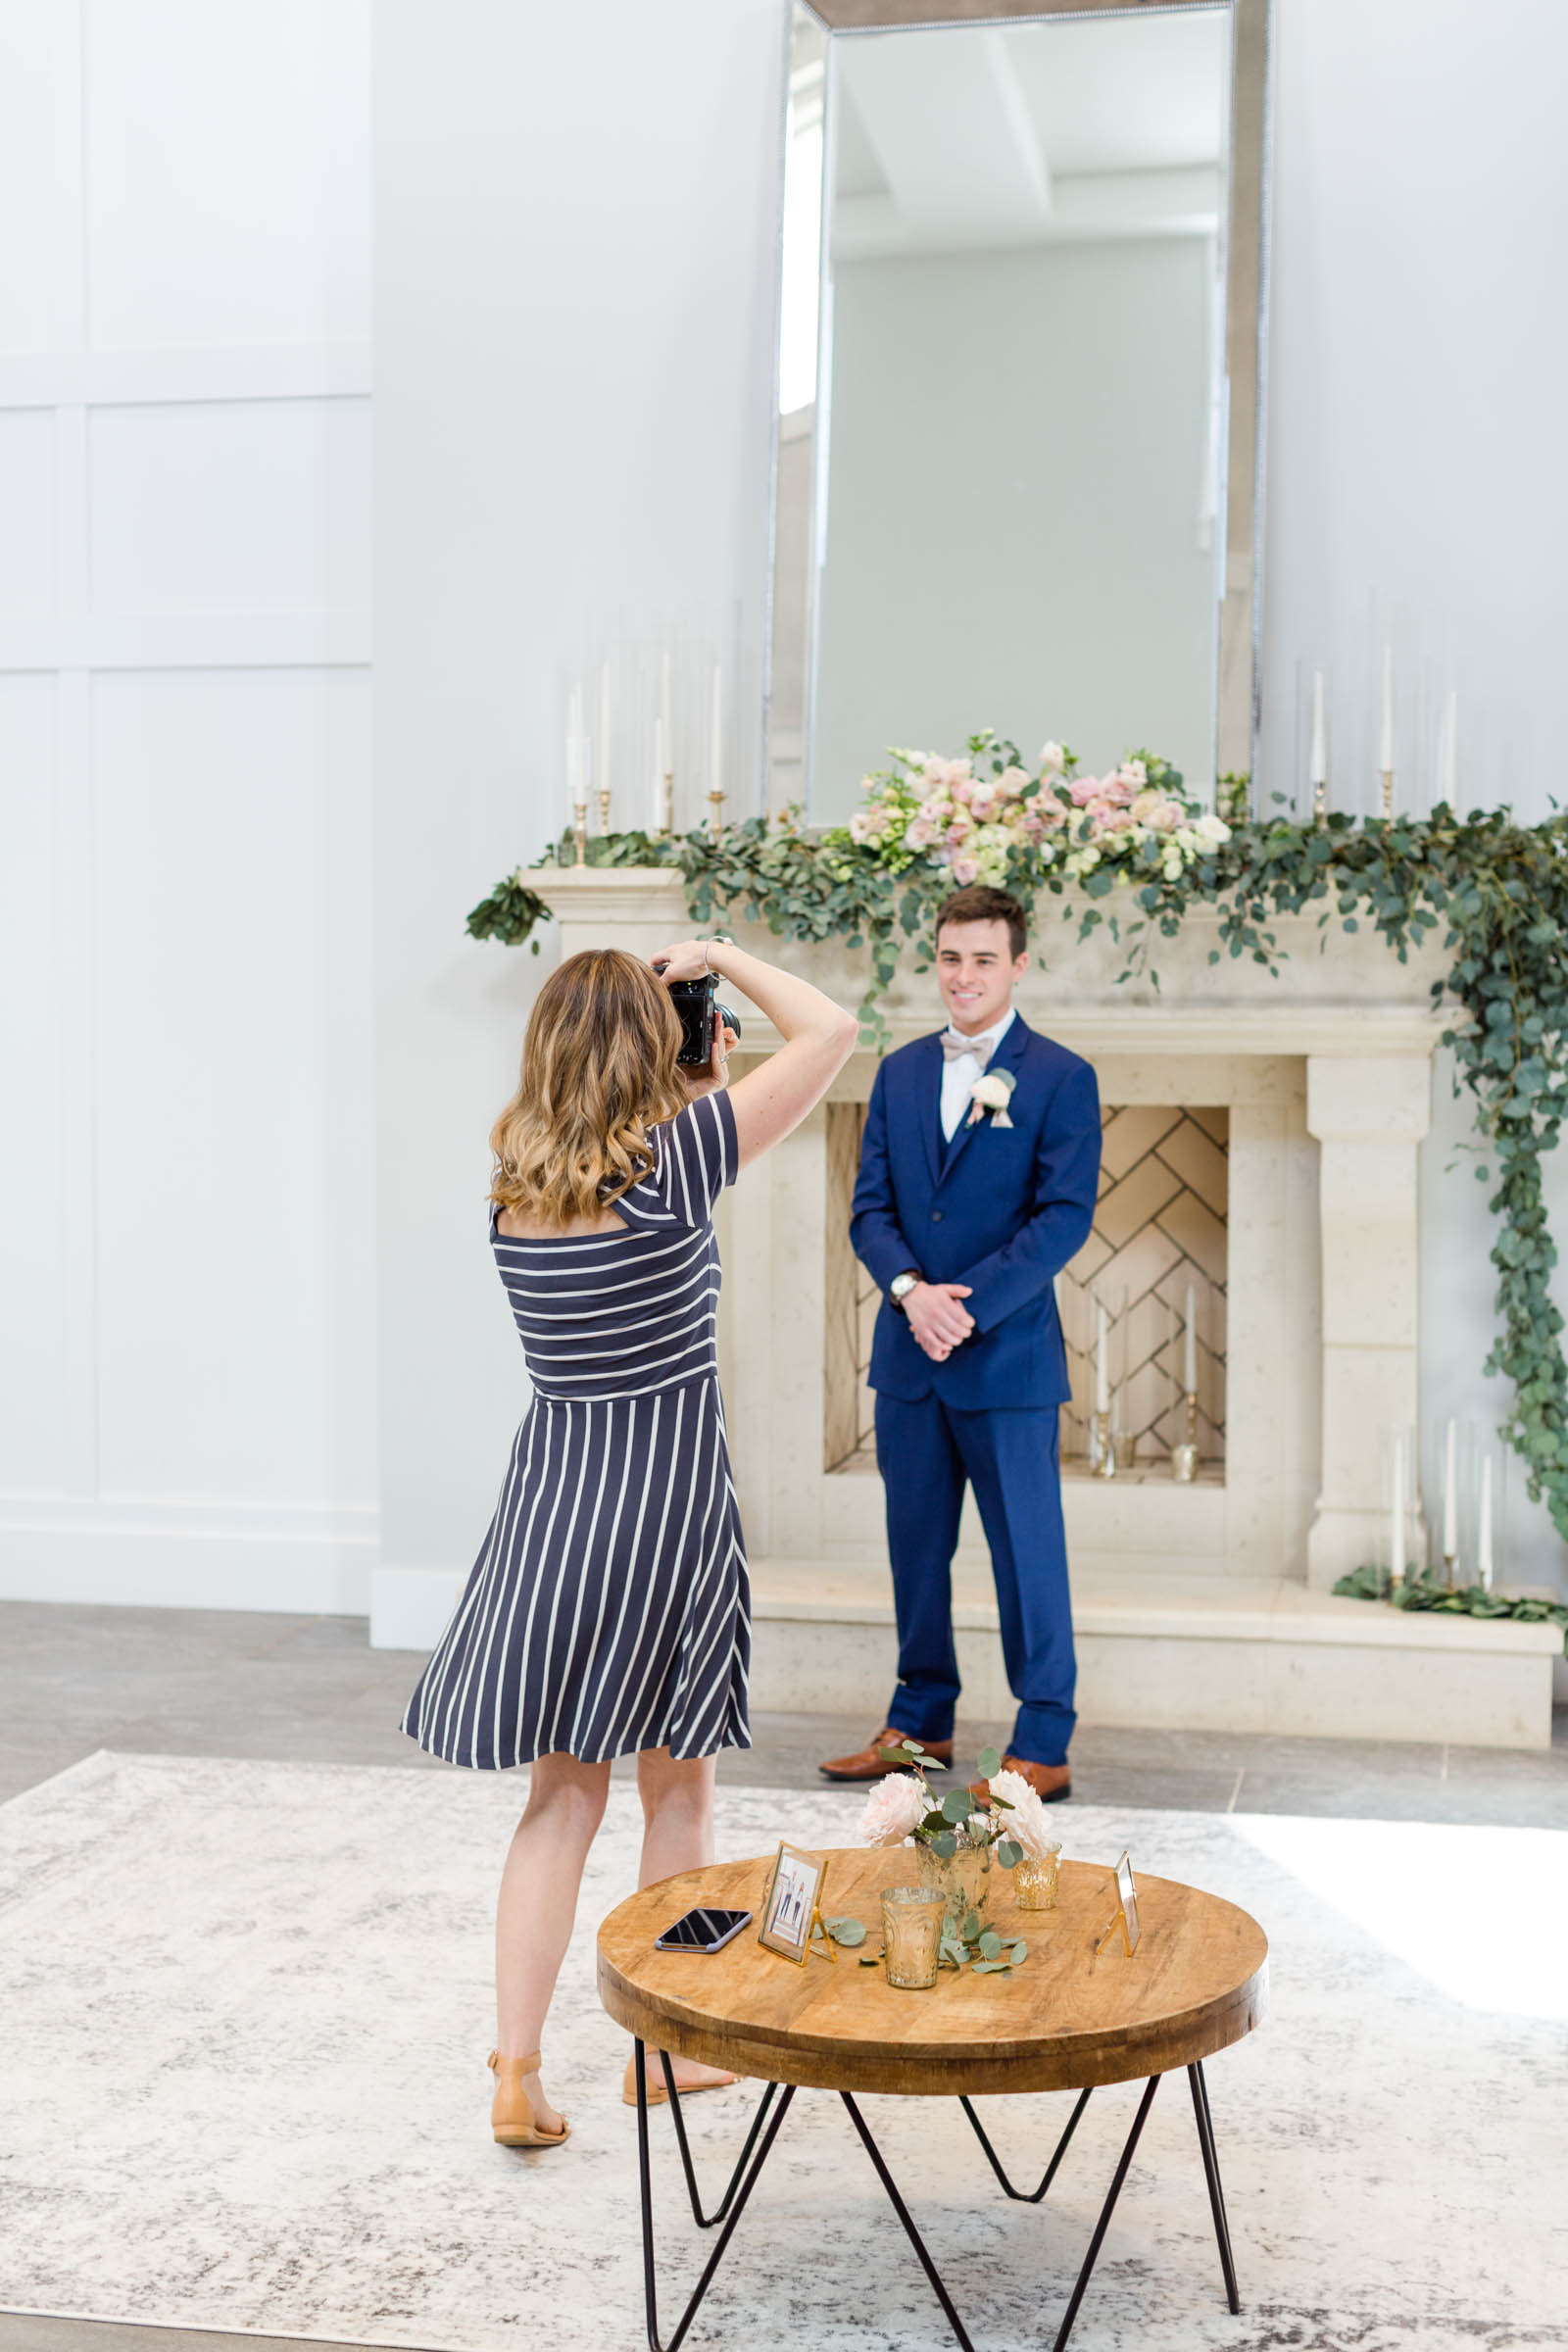 2019 Behind The Scenes of Sweet Williams Photography. Becca Musayev is a wedding, engagement and portrait photographer serving the Nashville, Tennesee locations and beyond!